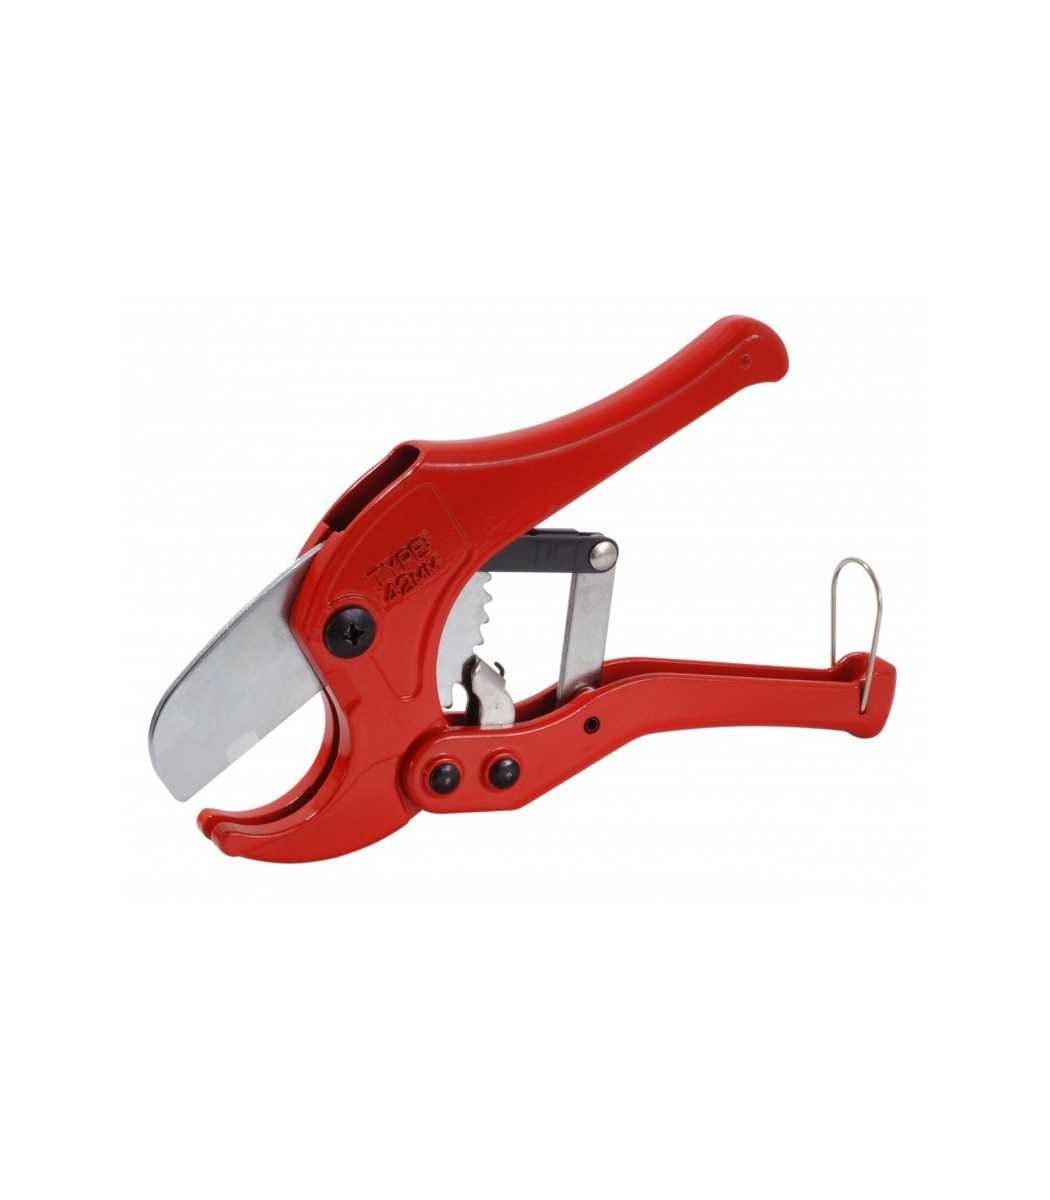 Pipe cutter for plastic pipes. Shear with ratchet by MGF Tools